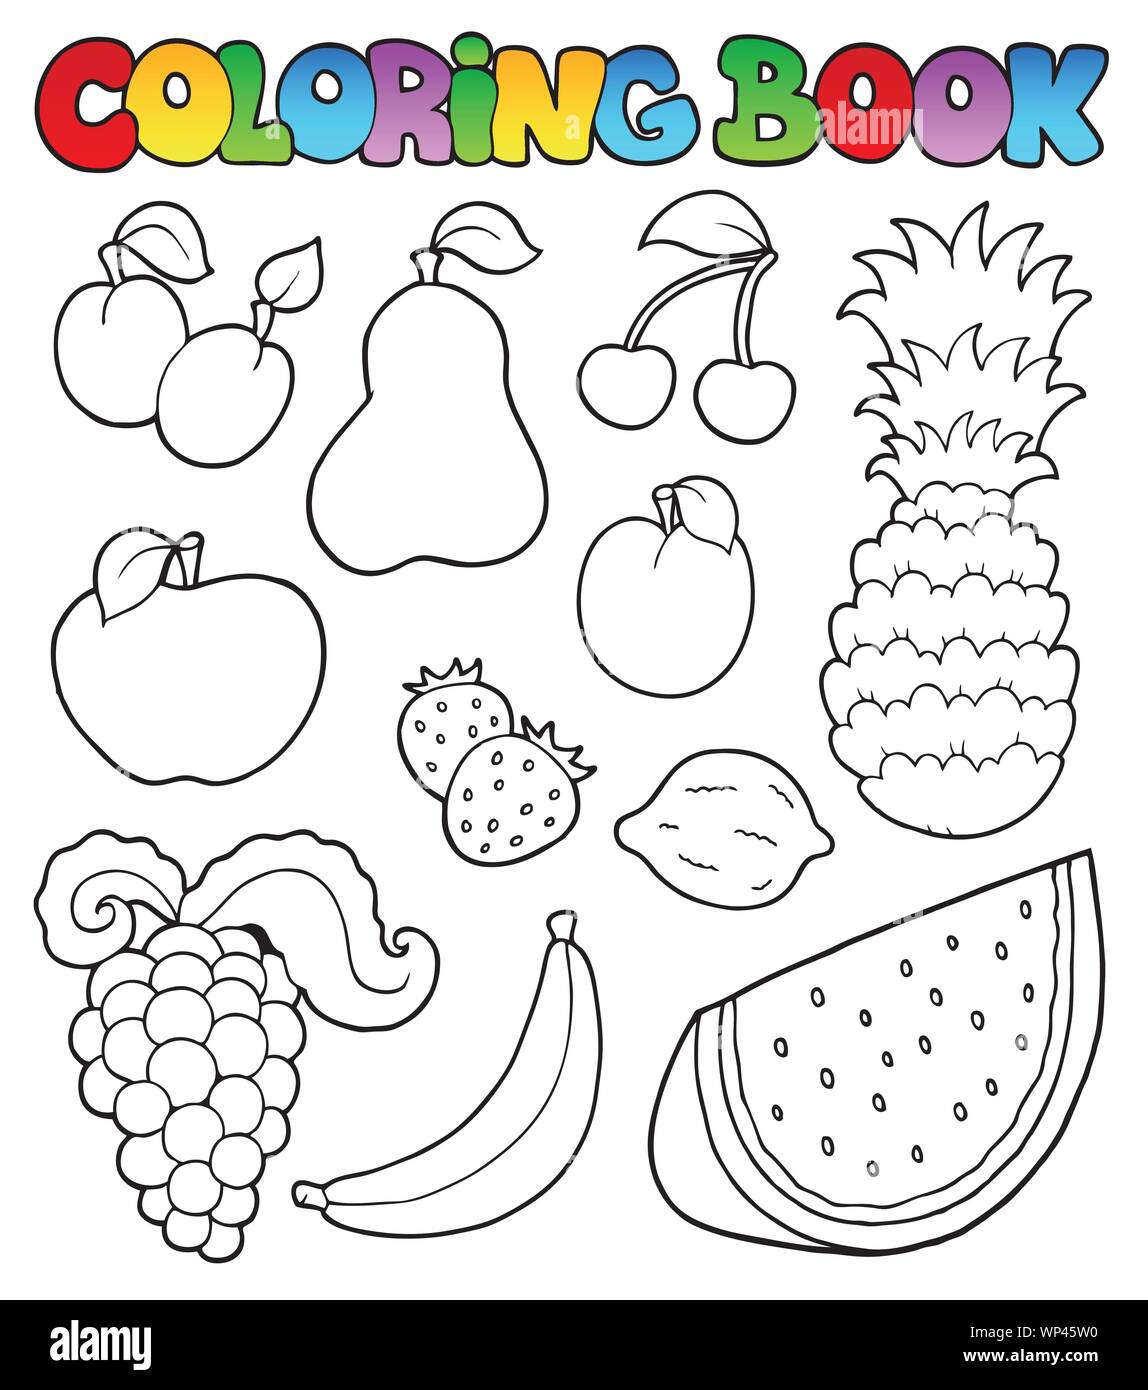 Coloring book with fruits images stock vector image art